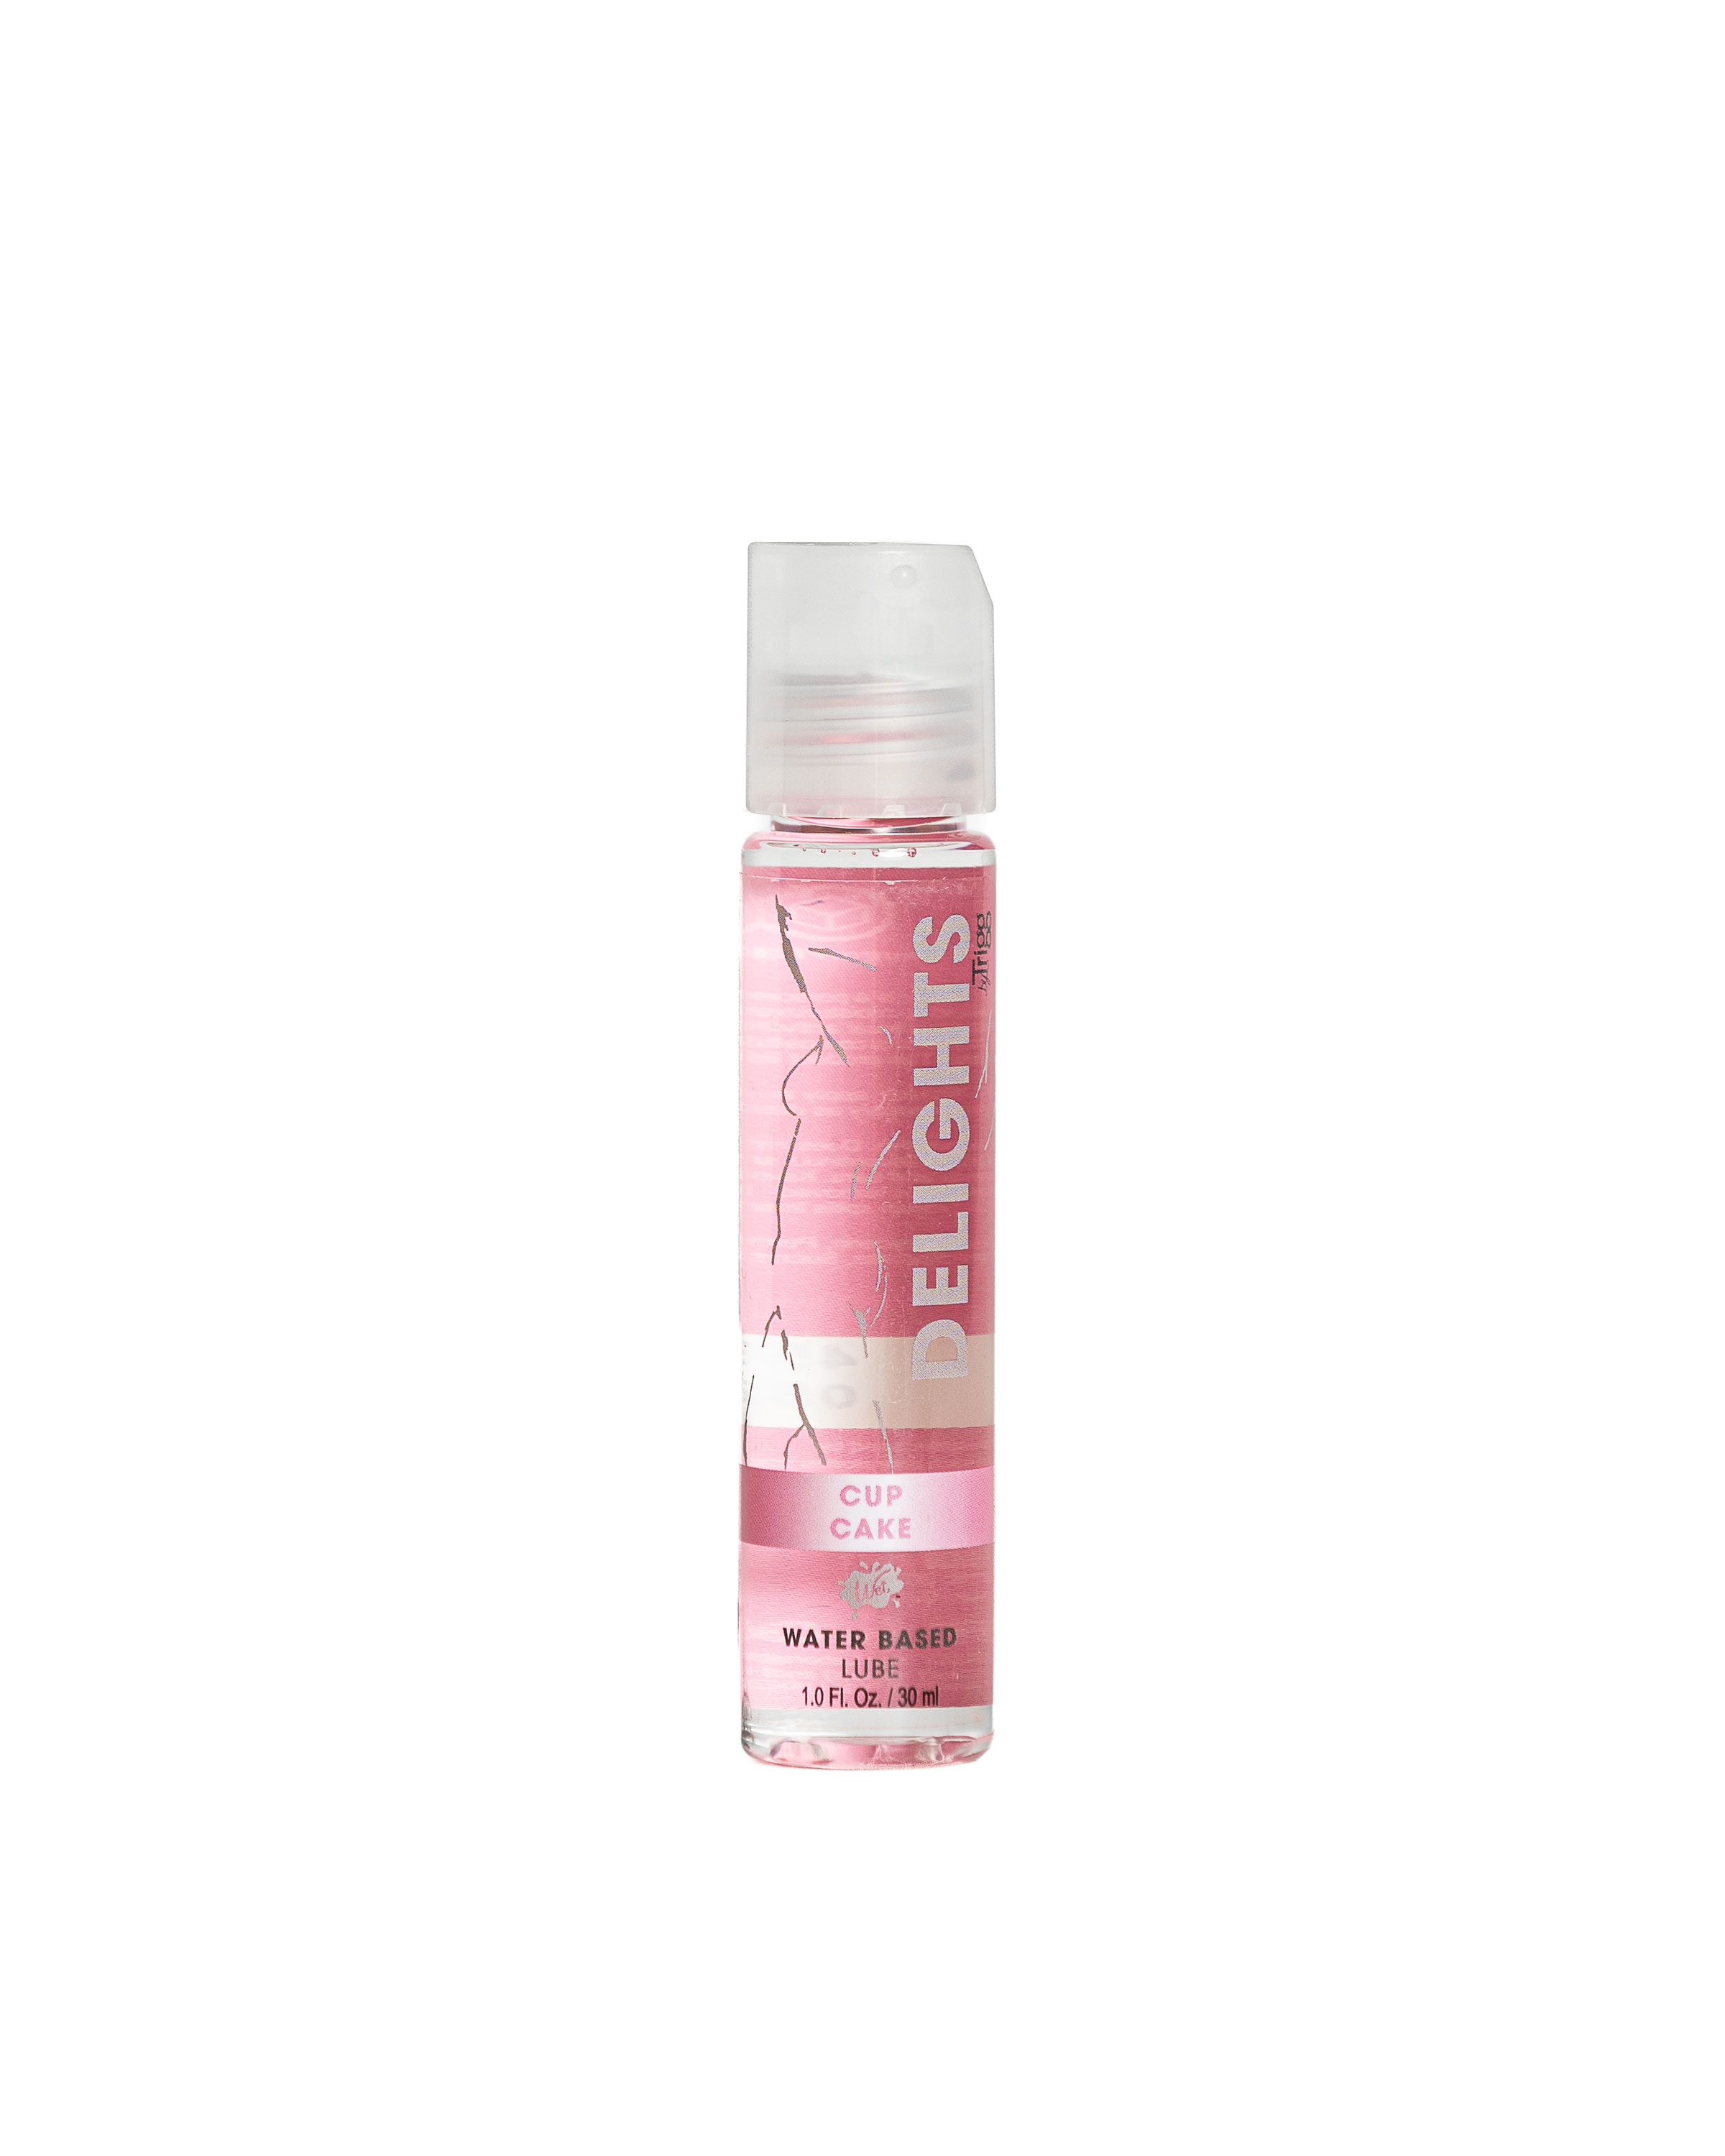 delight water based cupcake flavored lube  oz 